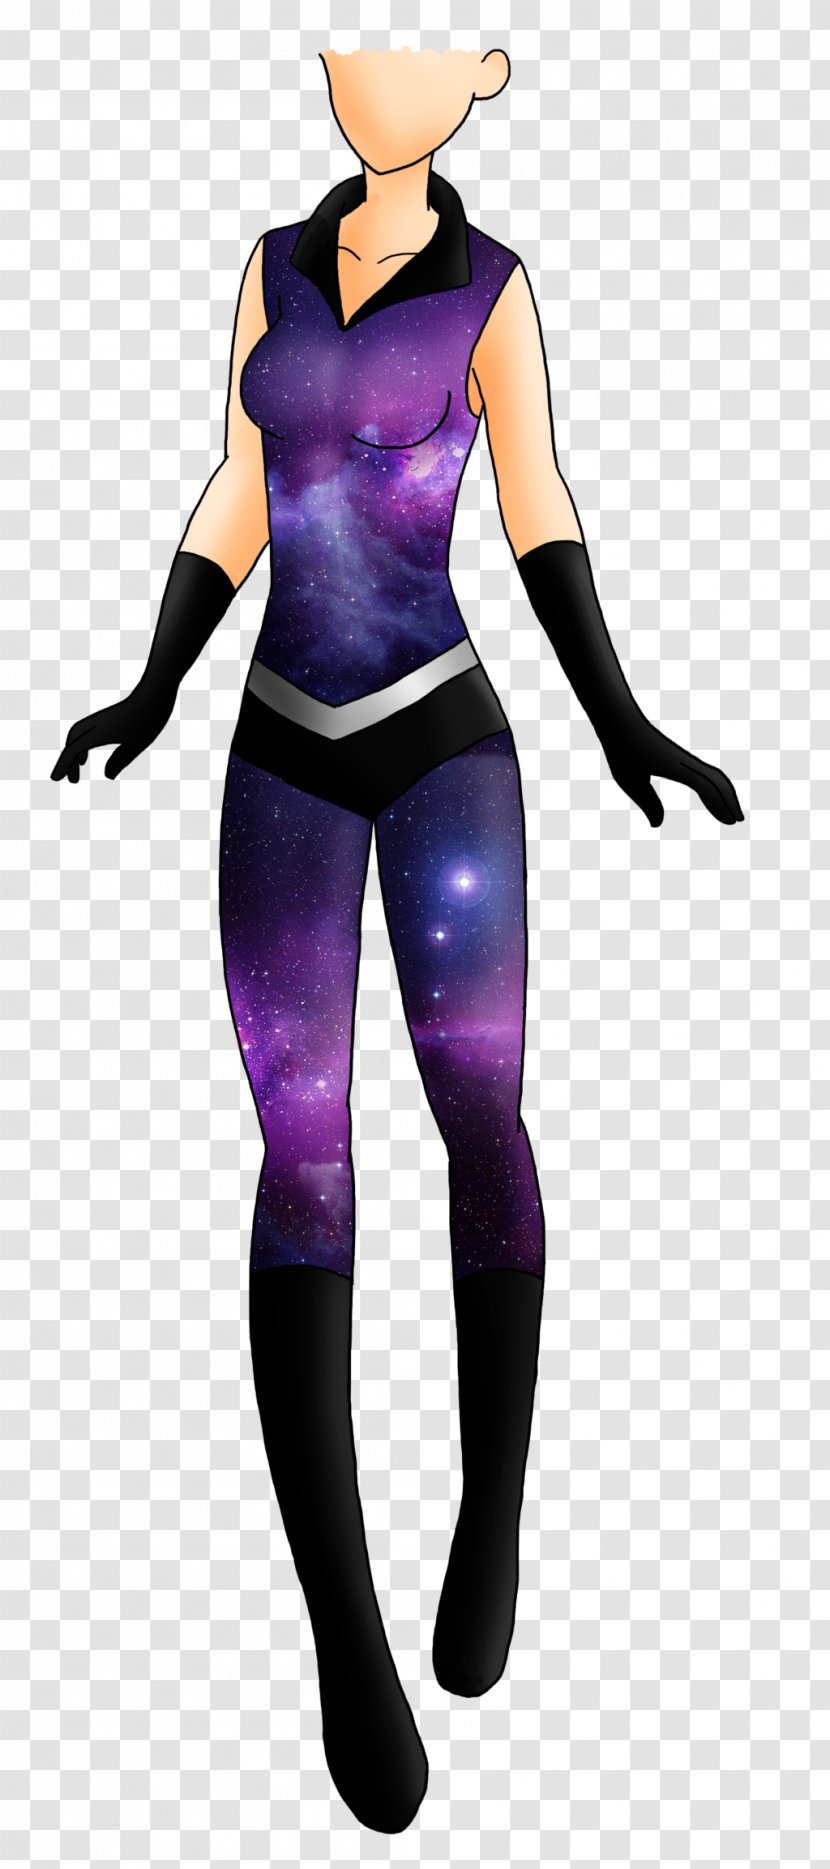 Wetsuit Spandex Character Animated Cartoon Fiction - Frame - Ginny Weasley Transparent PNG